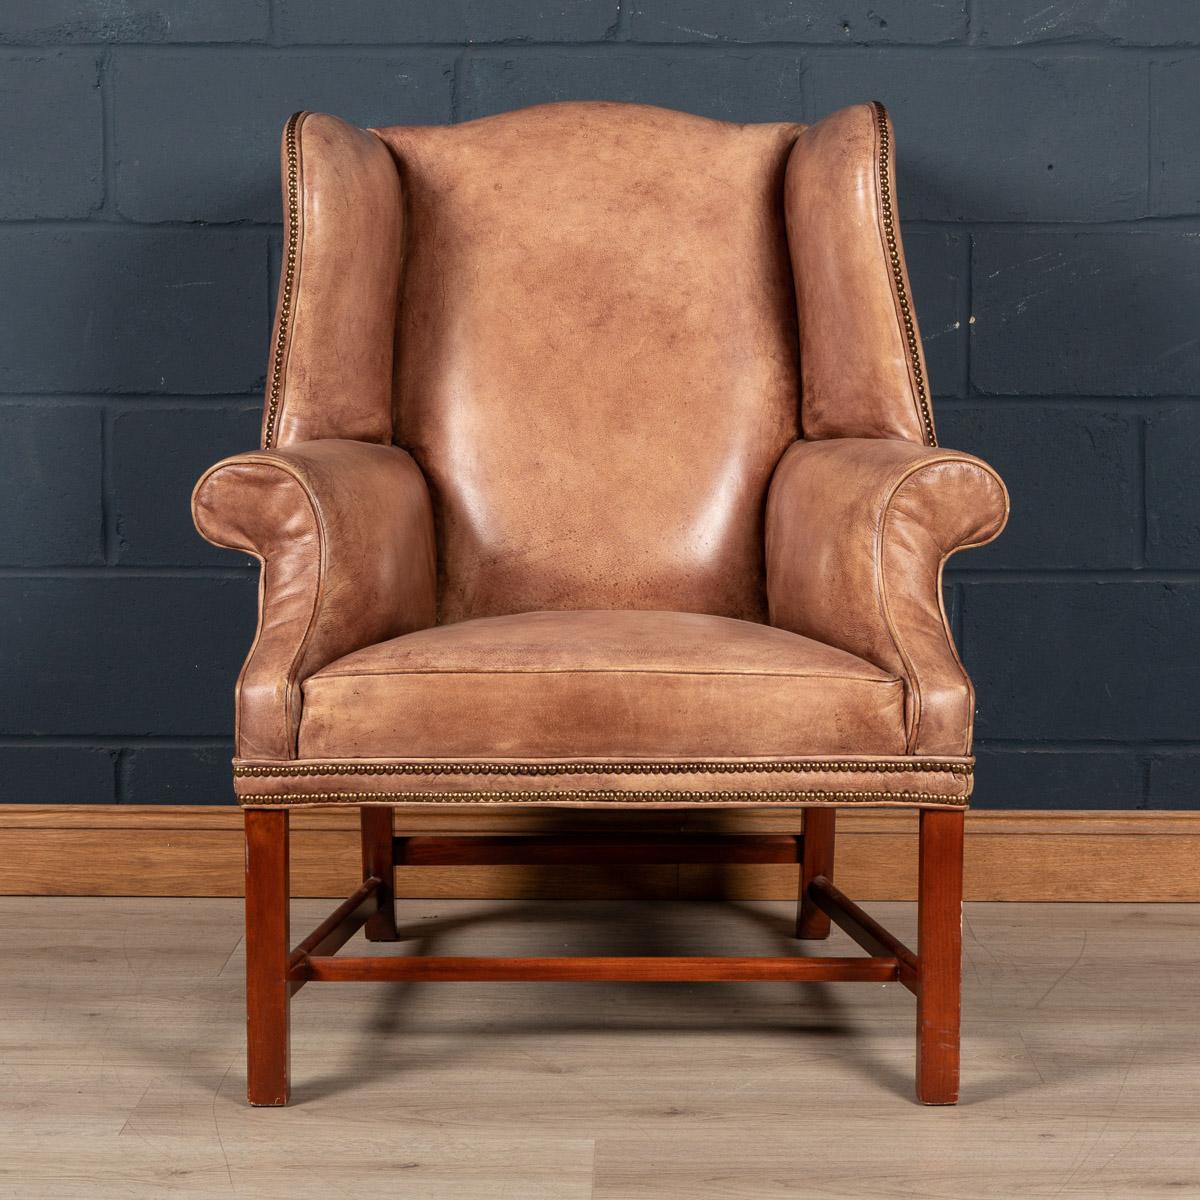 British 20th Century English Sheepskin Leather Wingback Armchair For Sale